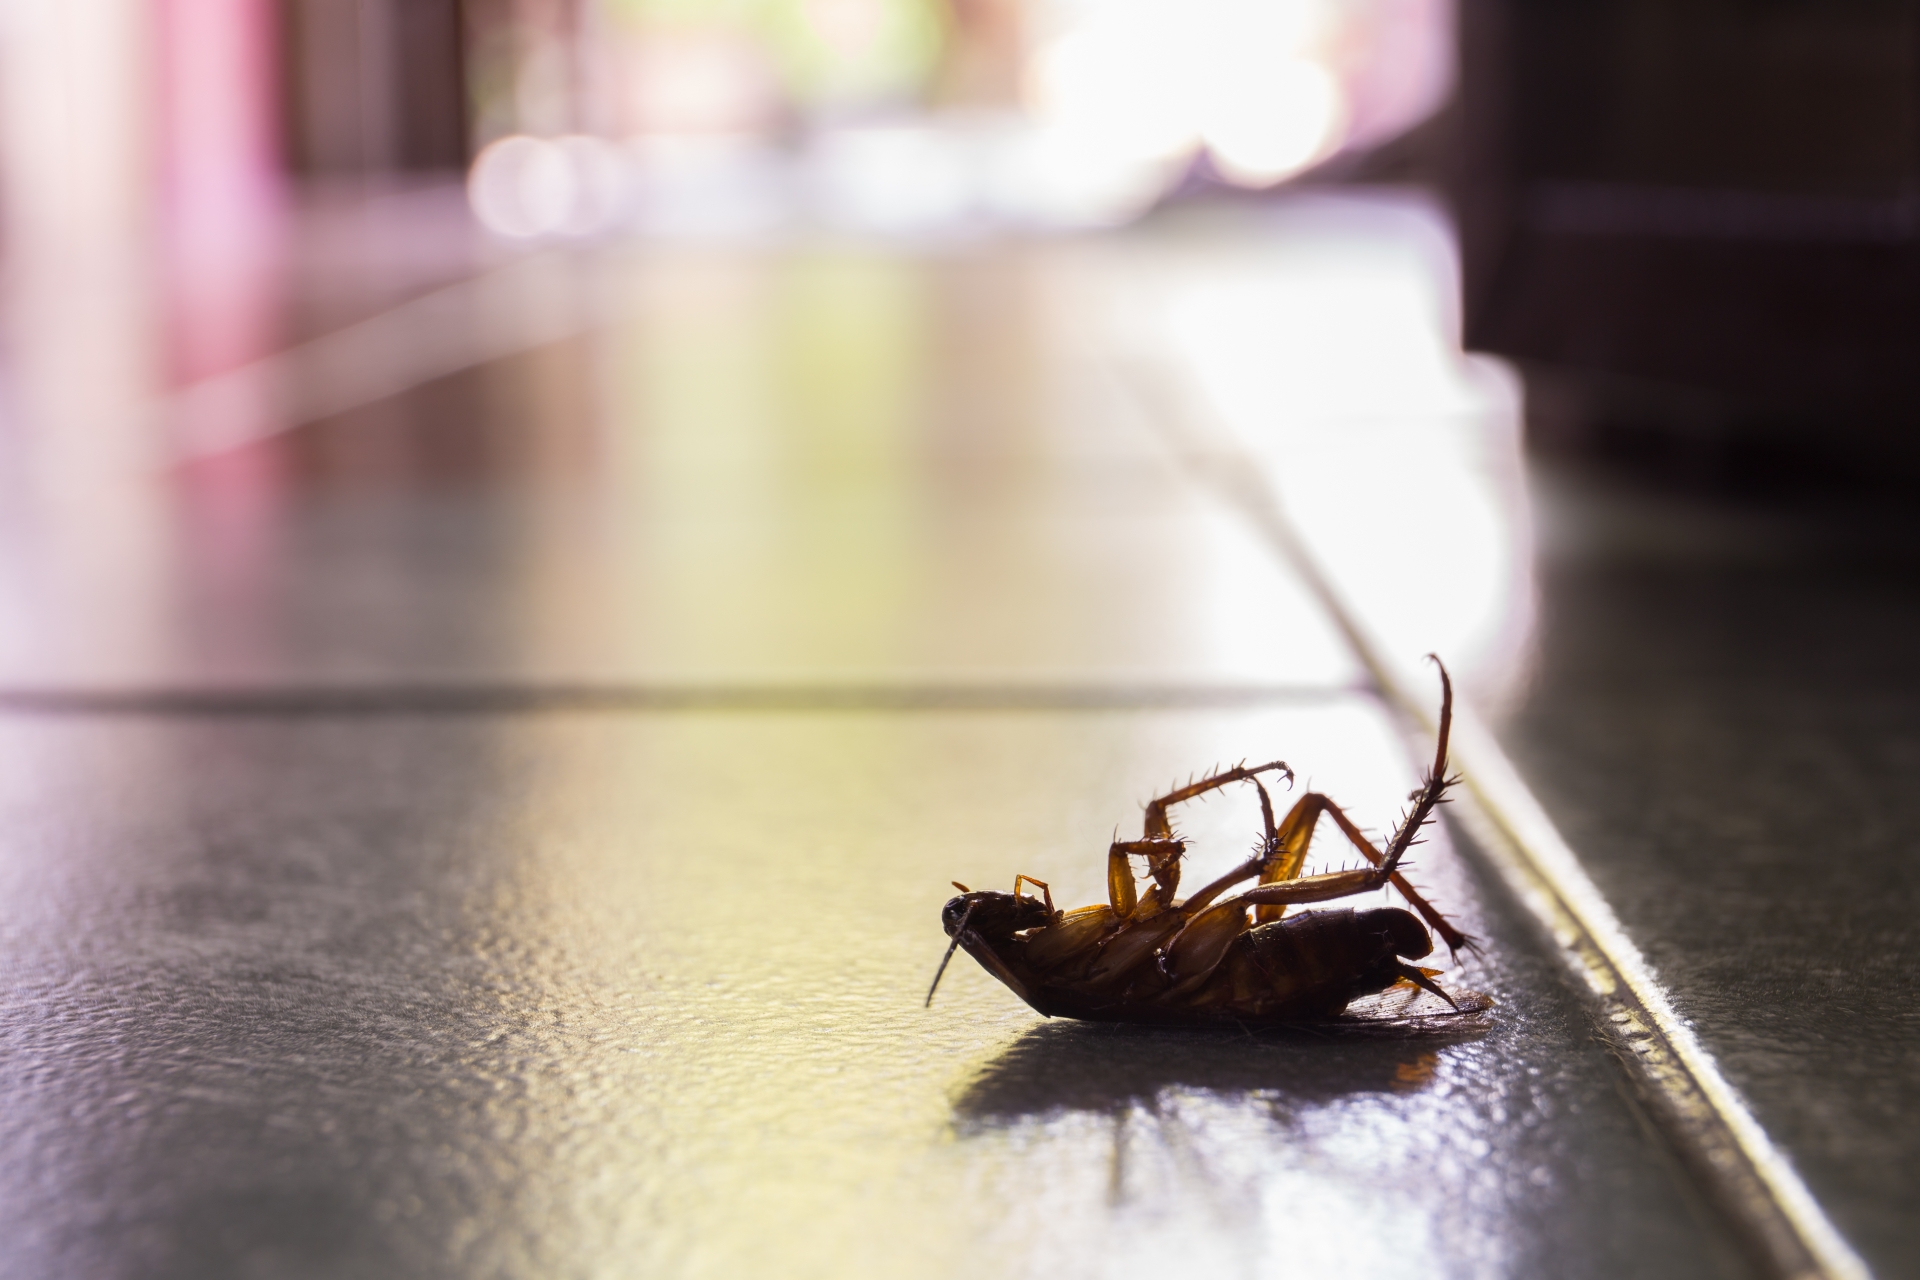 Cockroach Control, Pest Control in Kings Langley, Chipperfield, WD4. Call Now 020 8166 9746